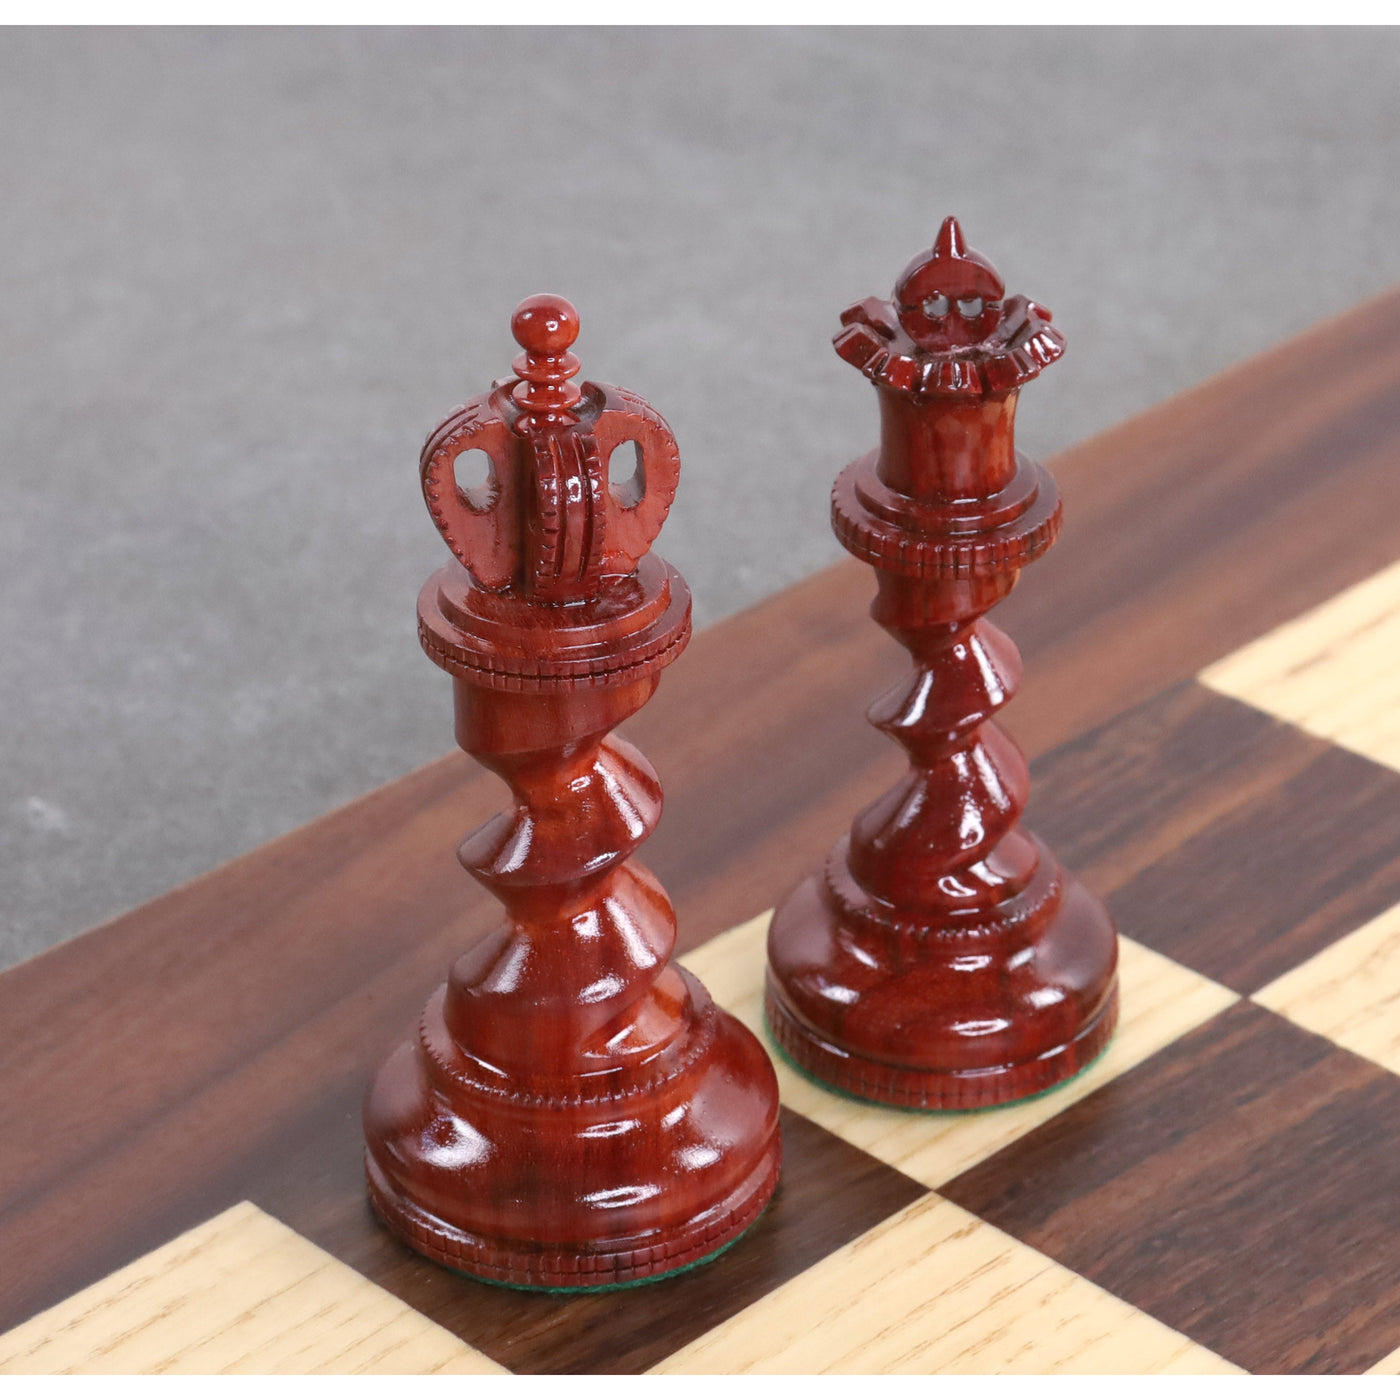 Slightly Imperfect 4.3" Grazing Knight Luxury Staunton Chess Set - Chess Pieces Only - Lacquered Bud Rosewood